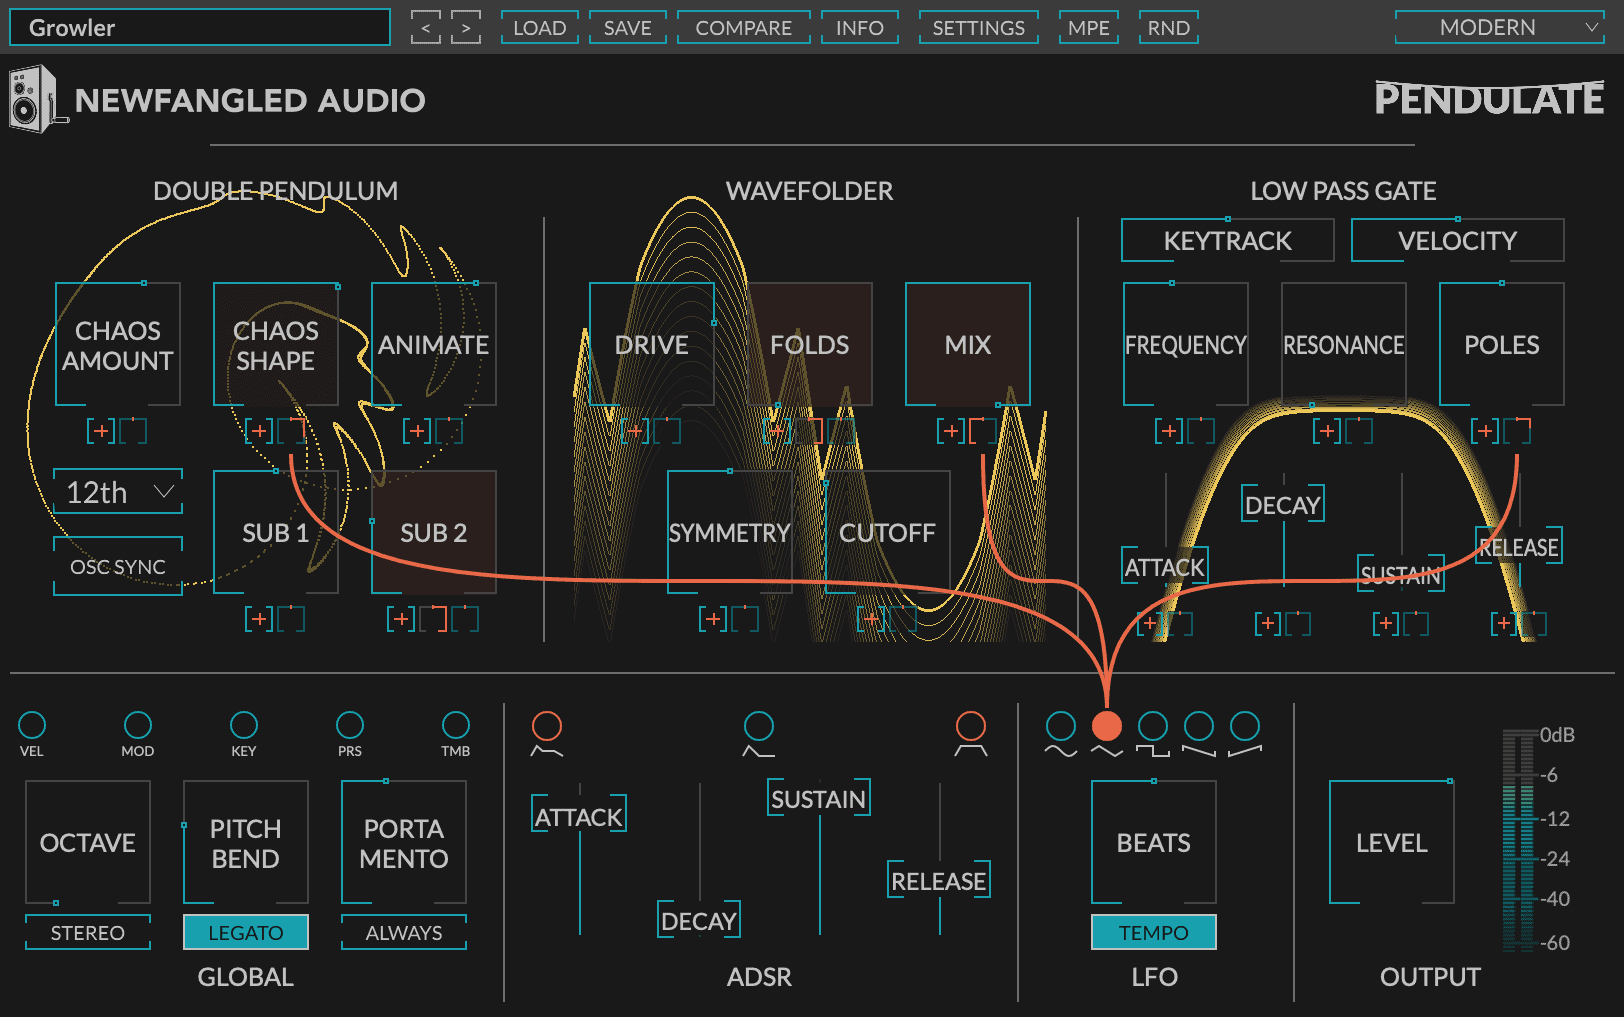 Pendulate A Chaotic Monosynth by Newfangled Audio